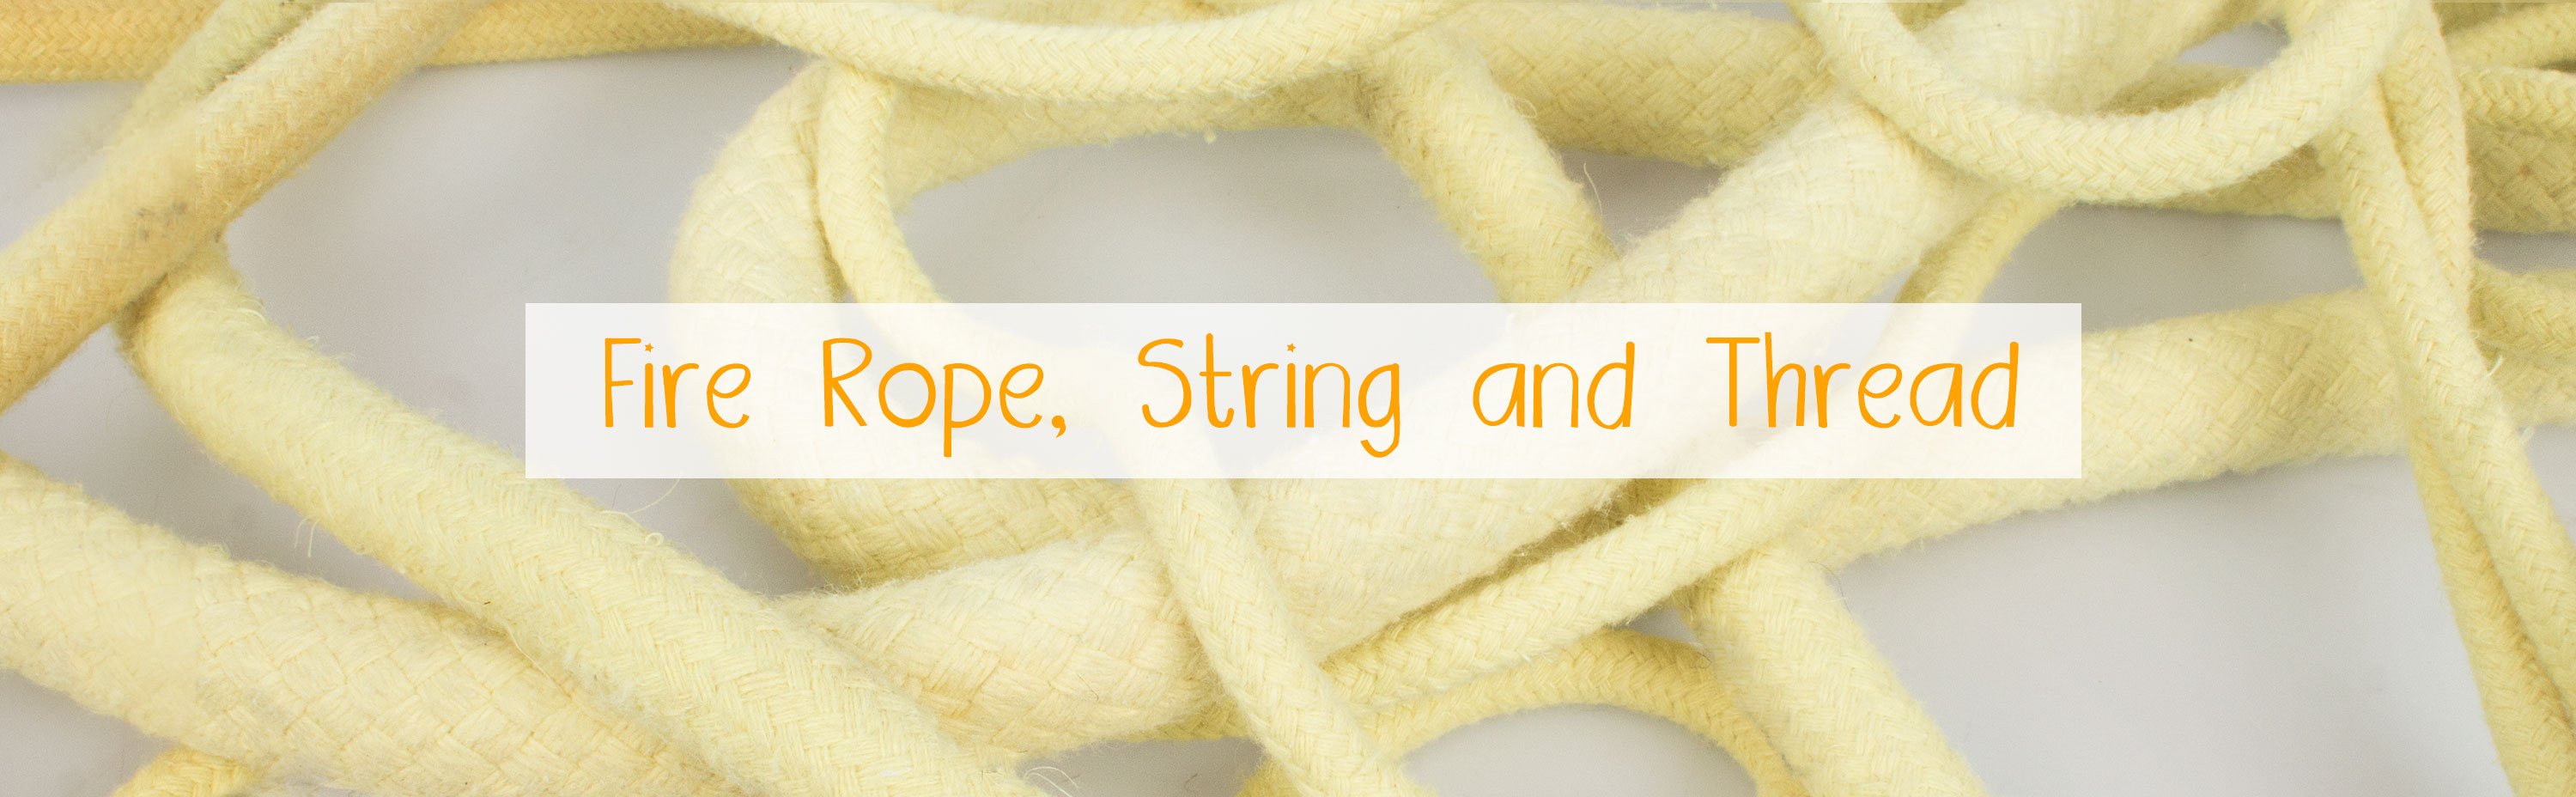 Fire Rope, String and Thread